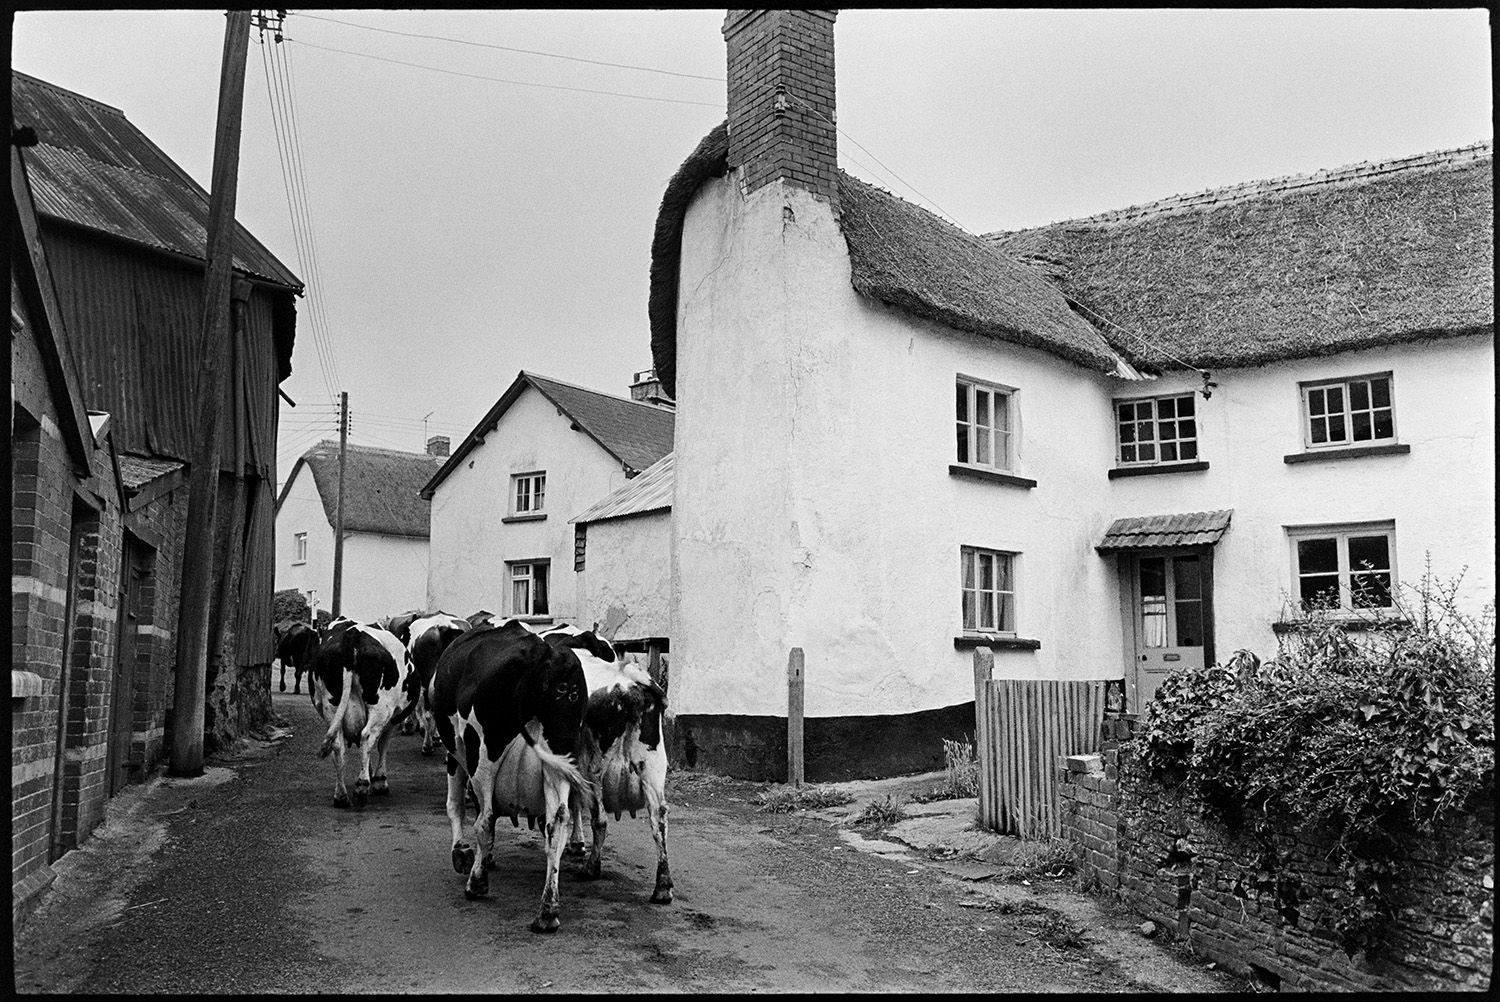 Milking herd of cows being driven through village behind tractor. 
[A dairy herd of cows being herded through a street in Exbourne past a thatched cottage and a corrugated iron barn.]